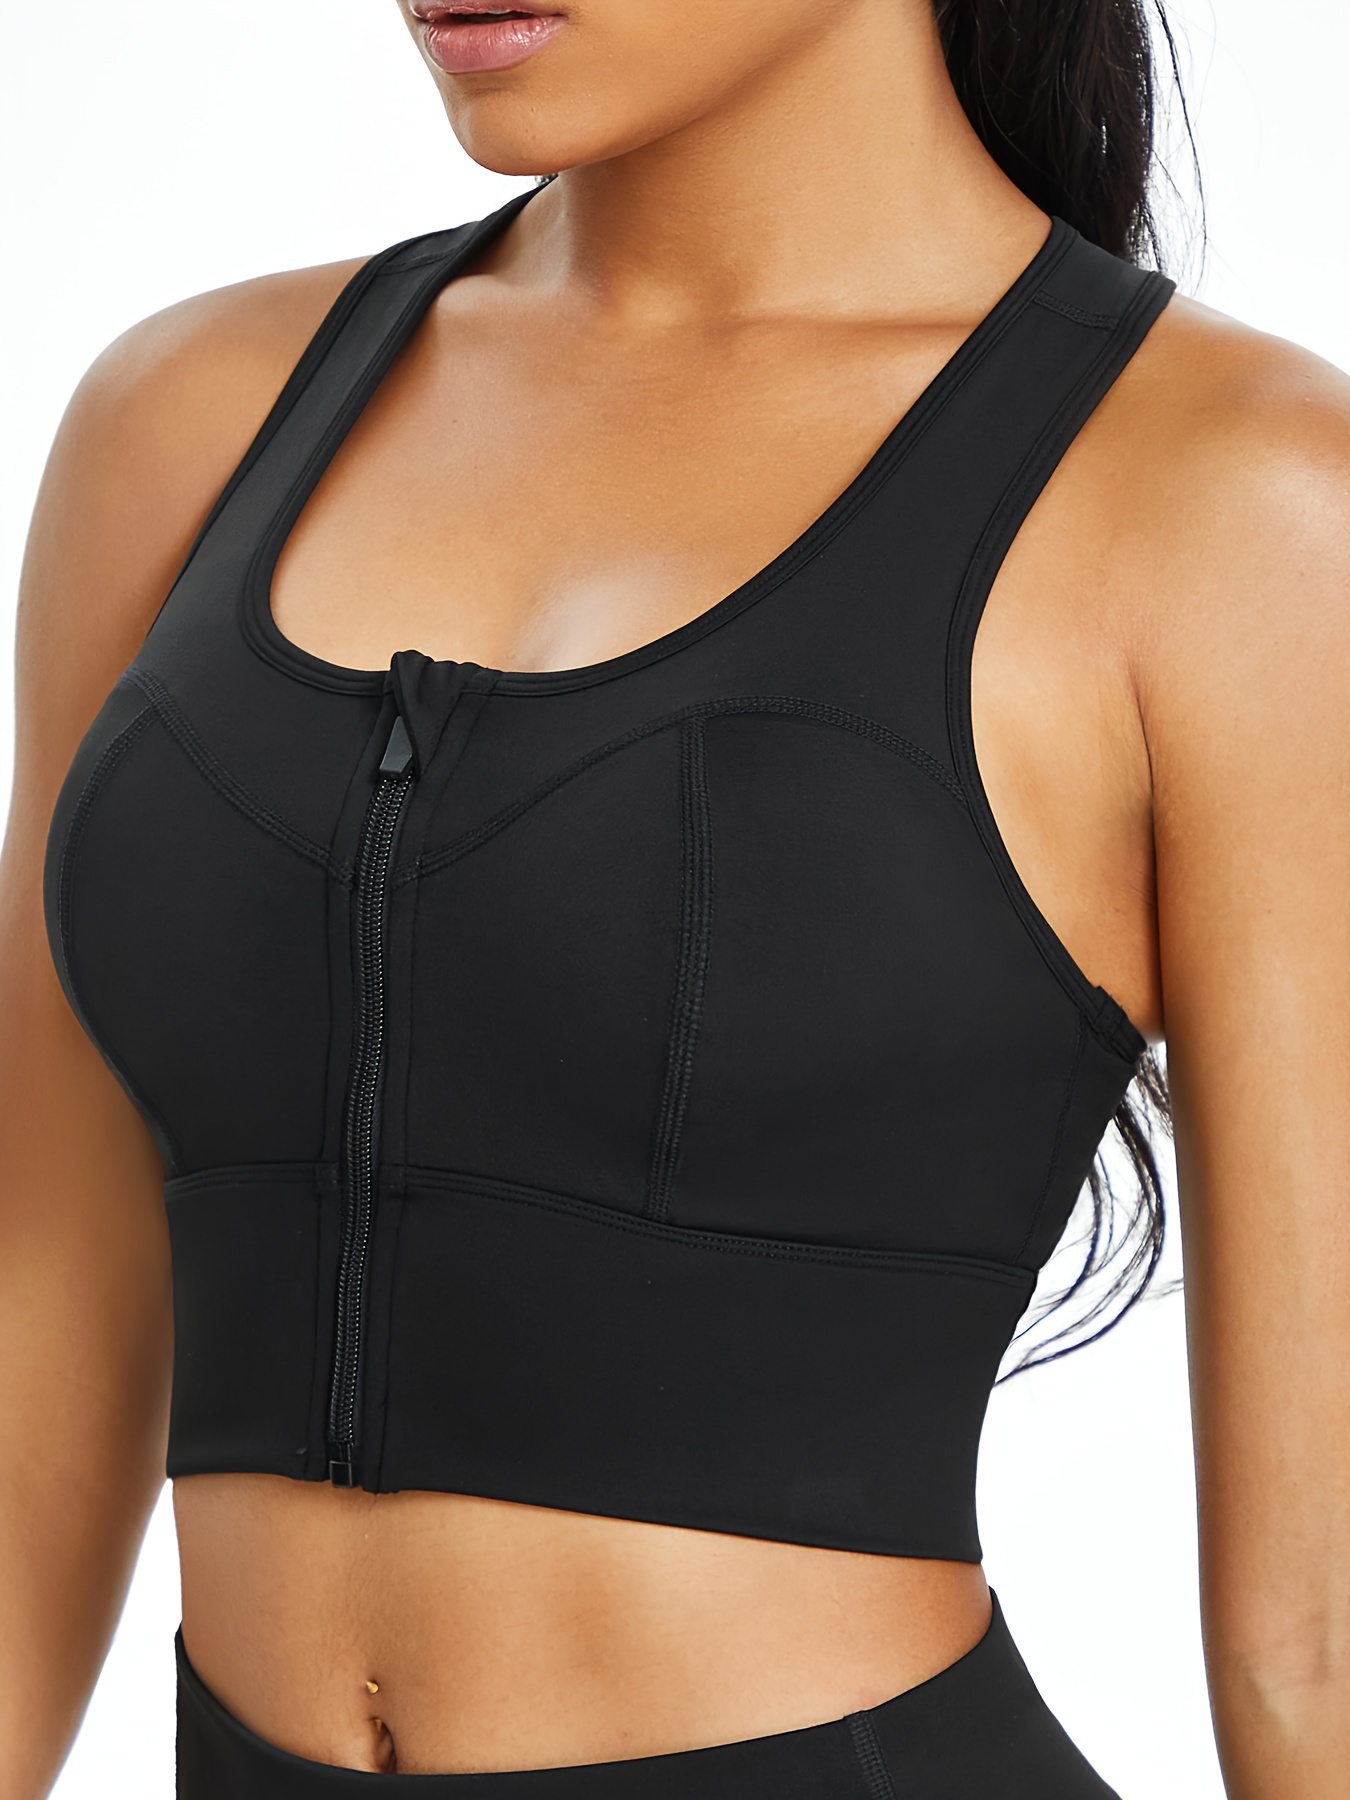 Gotoly Women Front Closure Sport Bras Full Coverage Bra Wirefree No Padding  Cross Back Support Tops with Zipper (Black Small)